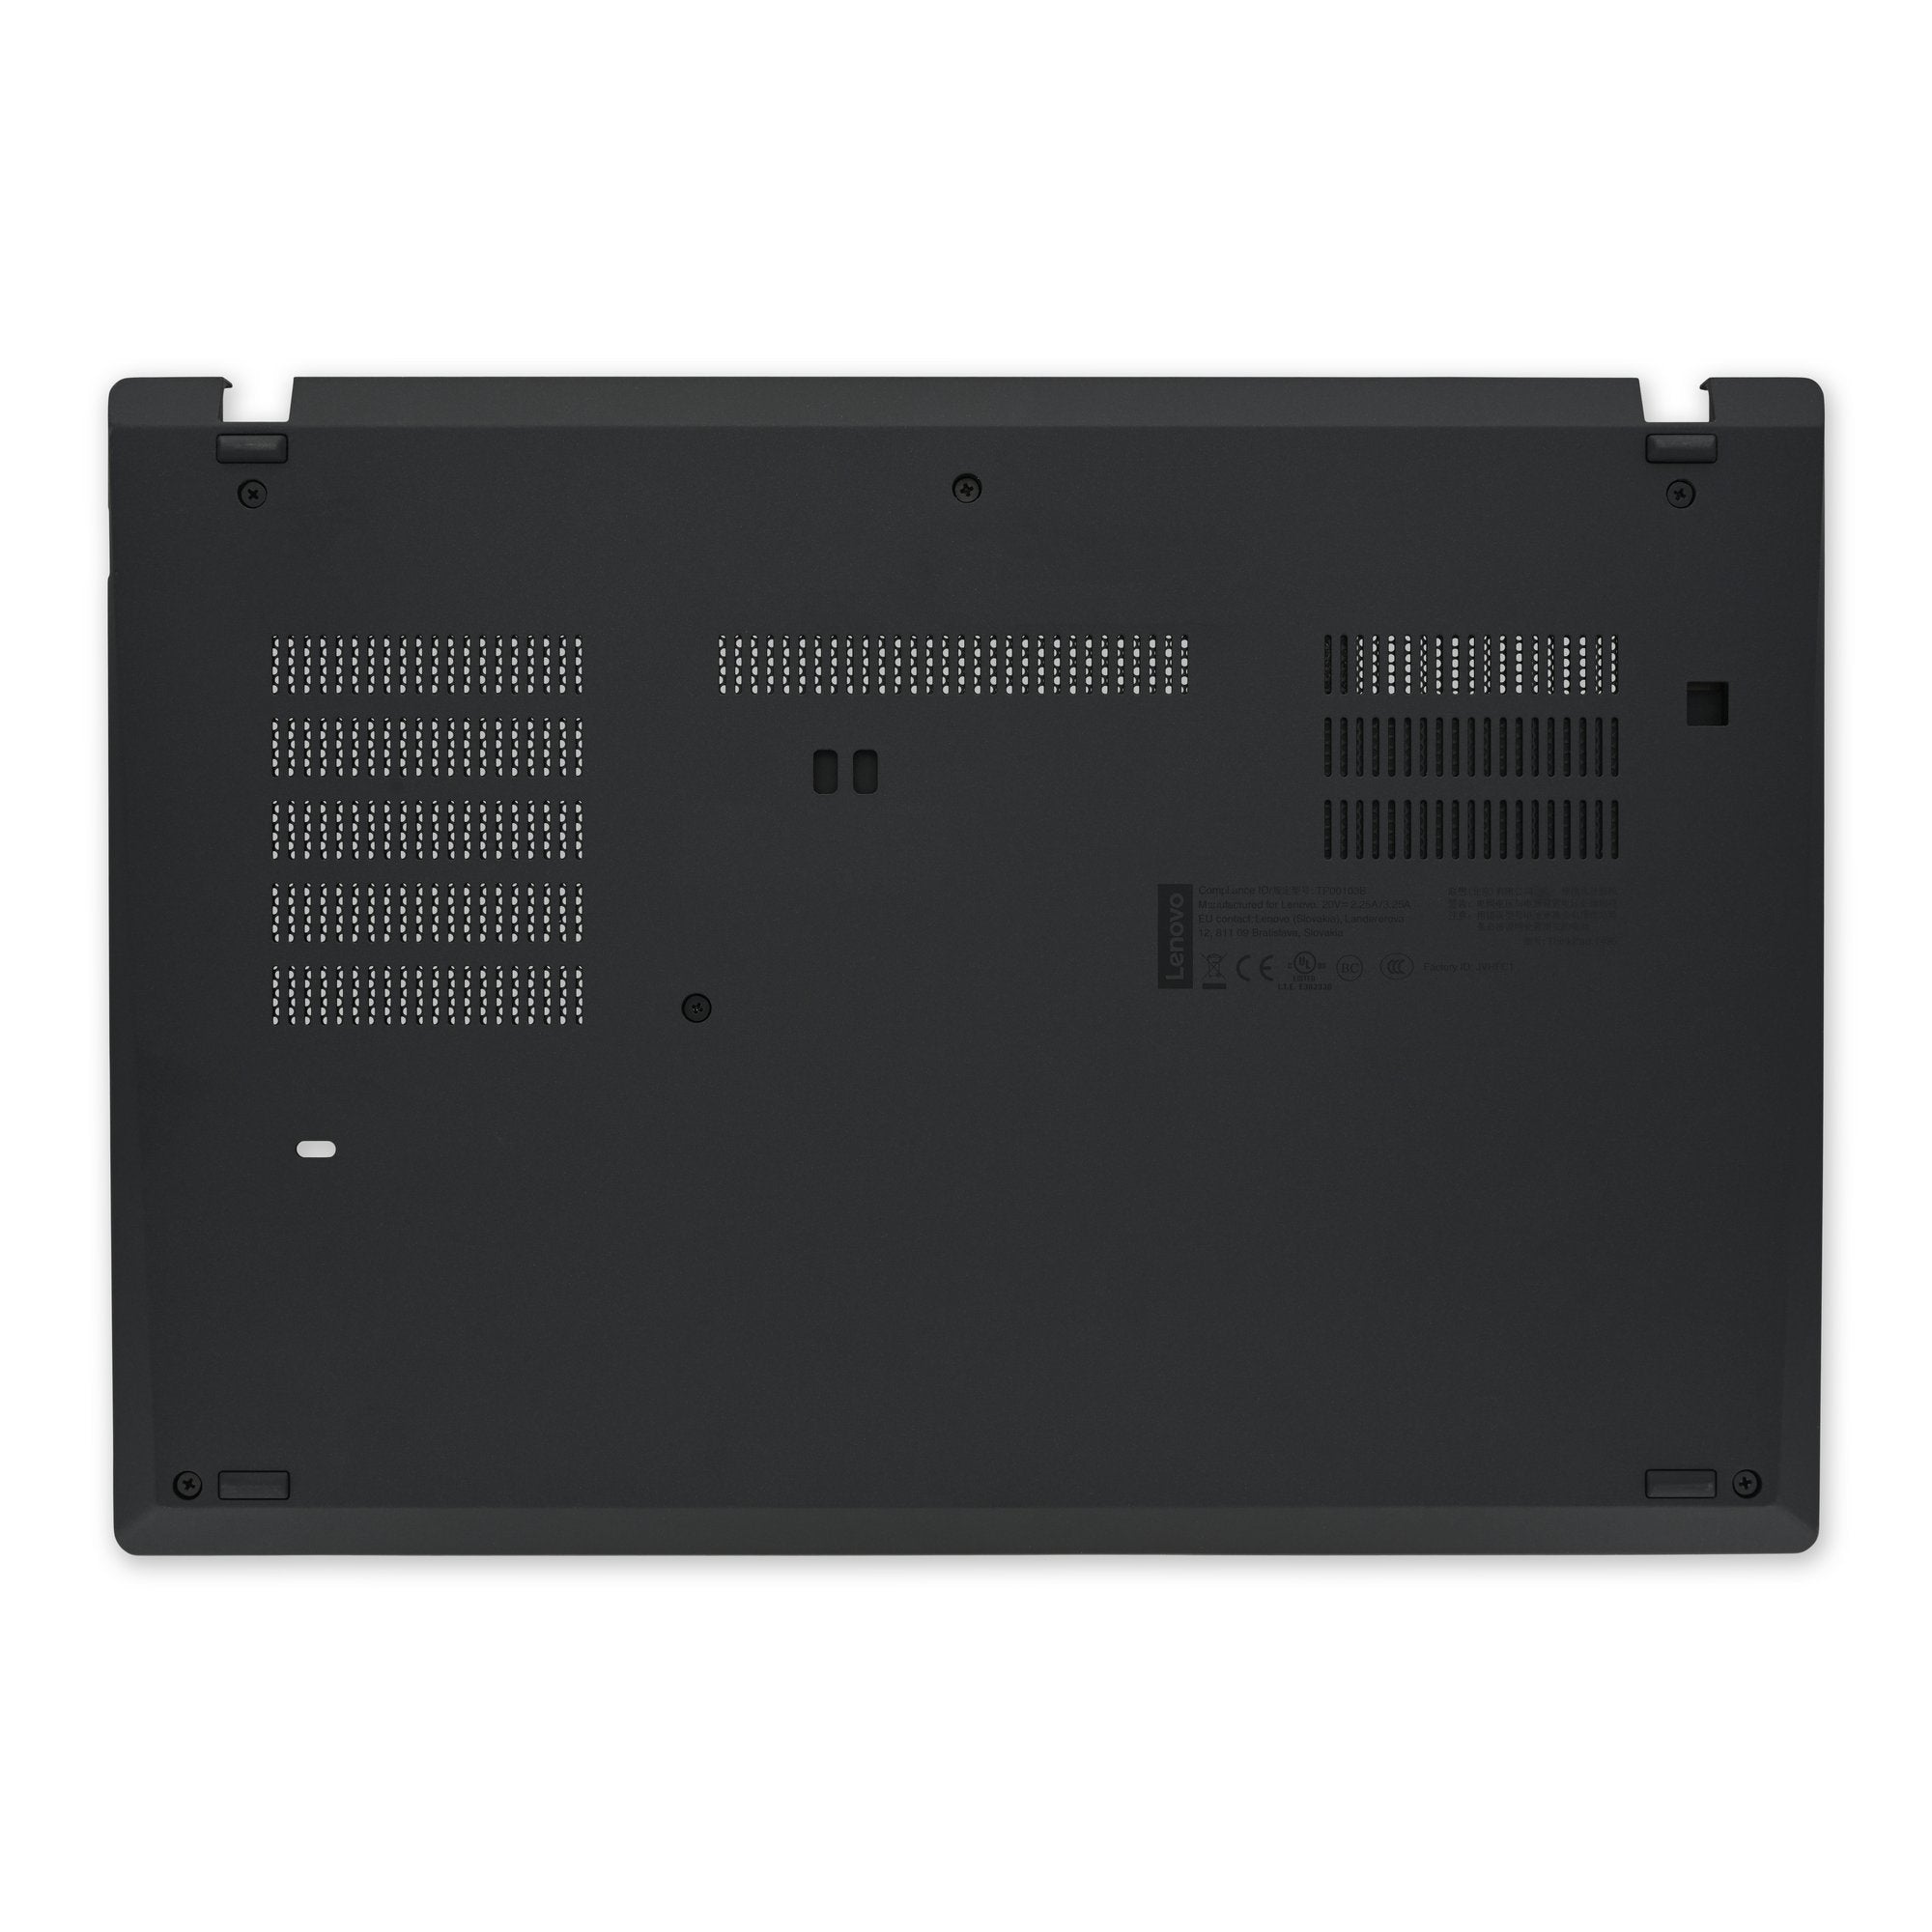 Lenovo ThinkPad T495 Lower Case Used, A-Stock